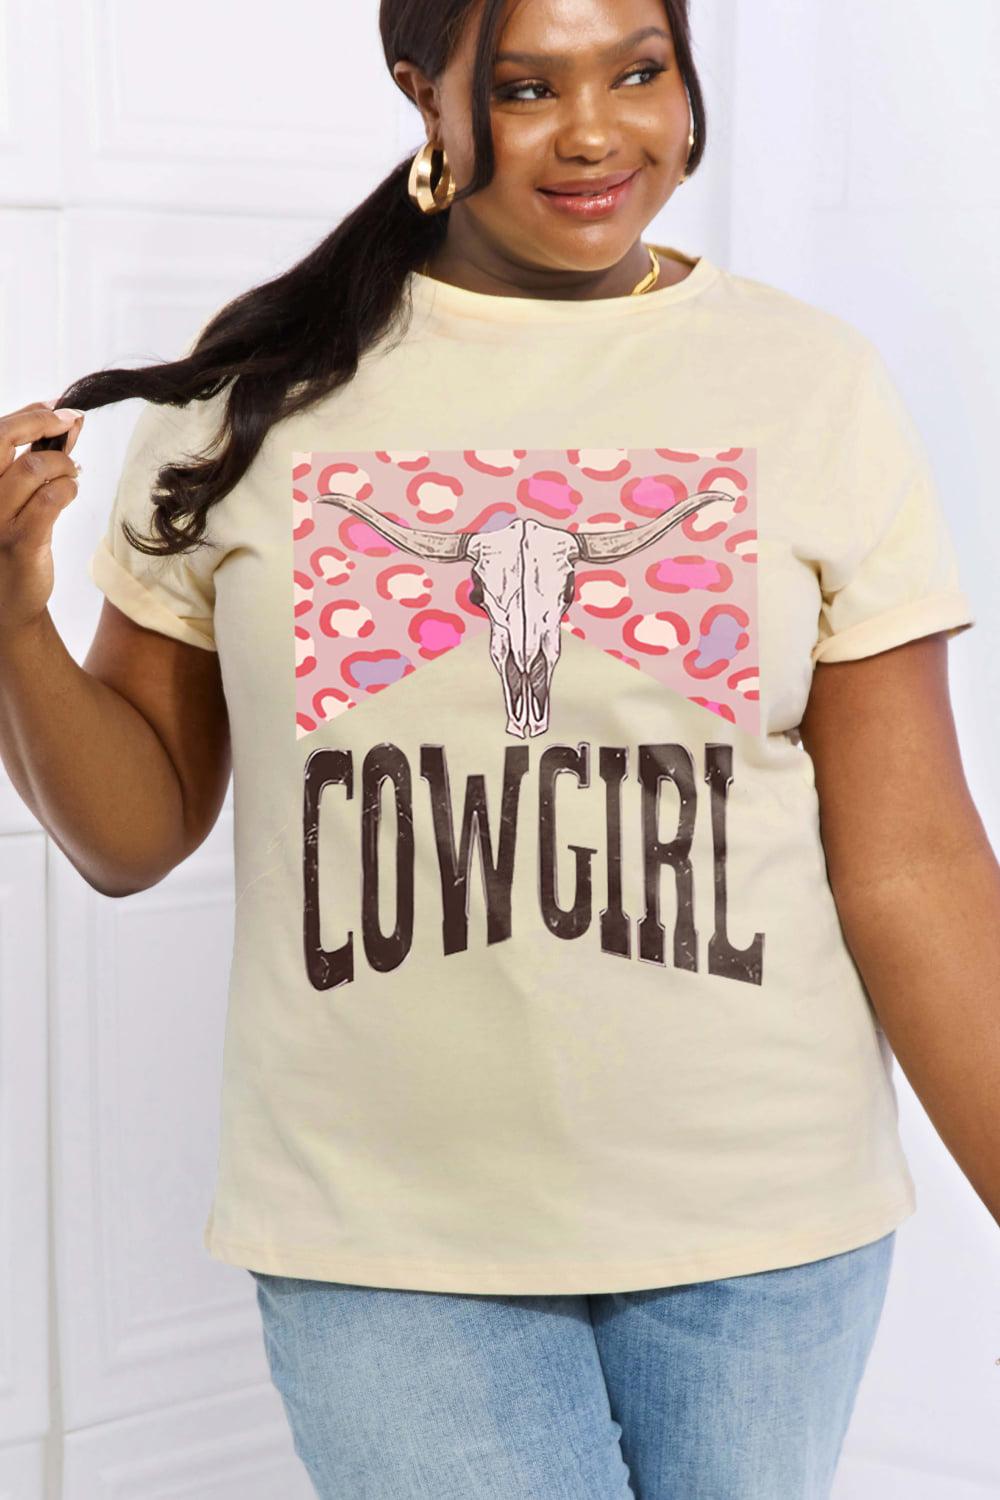 Simply Love Full Size COWGIRL Graphic Cotton Tee BLUE ZONE PLANET